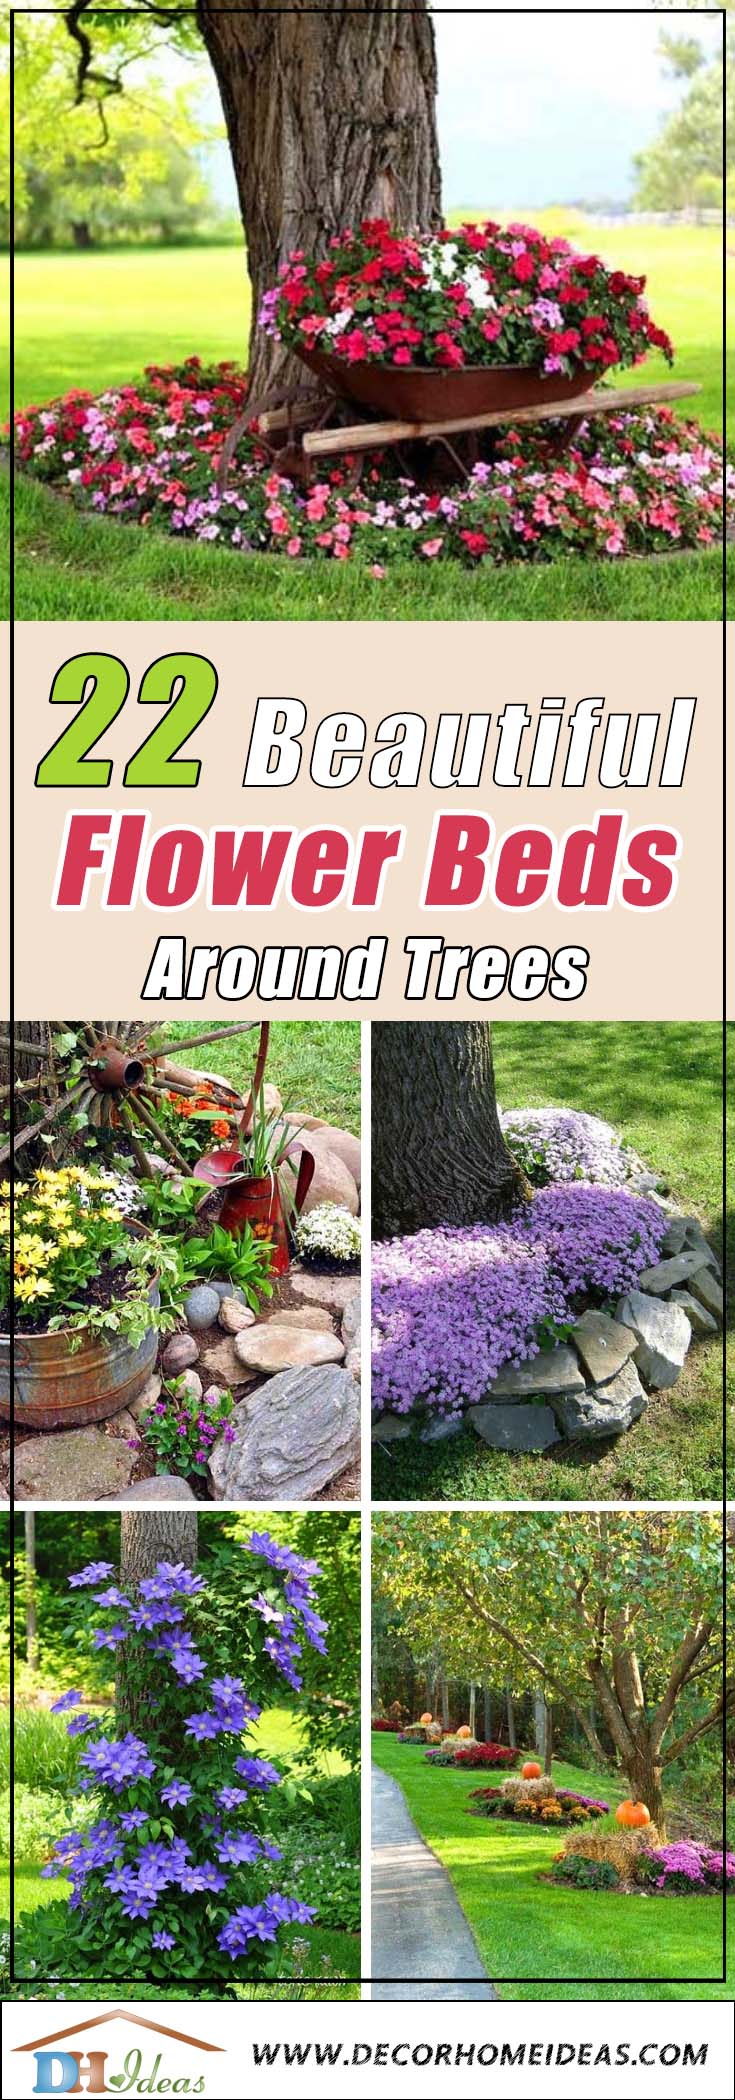 22 Beautiful Flower Beds Around Trees, Landscaping Around Trees With Stone